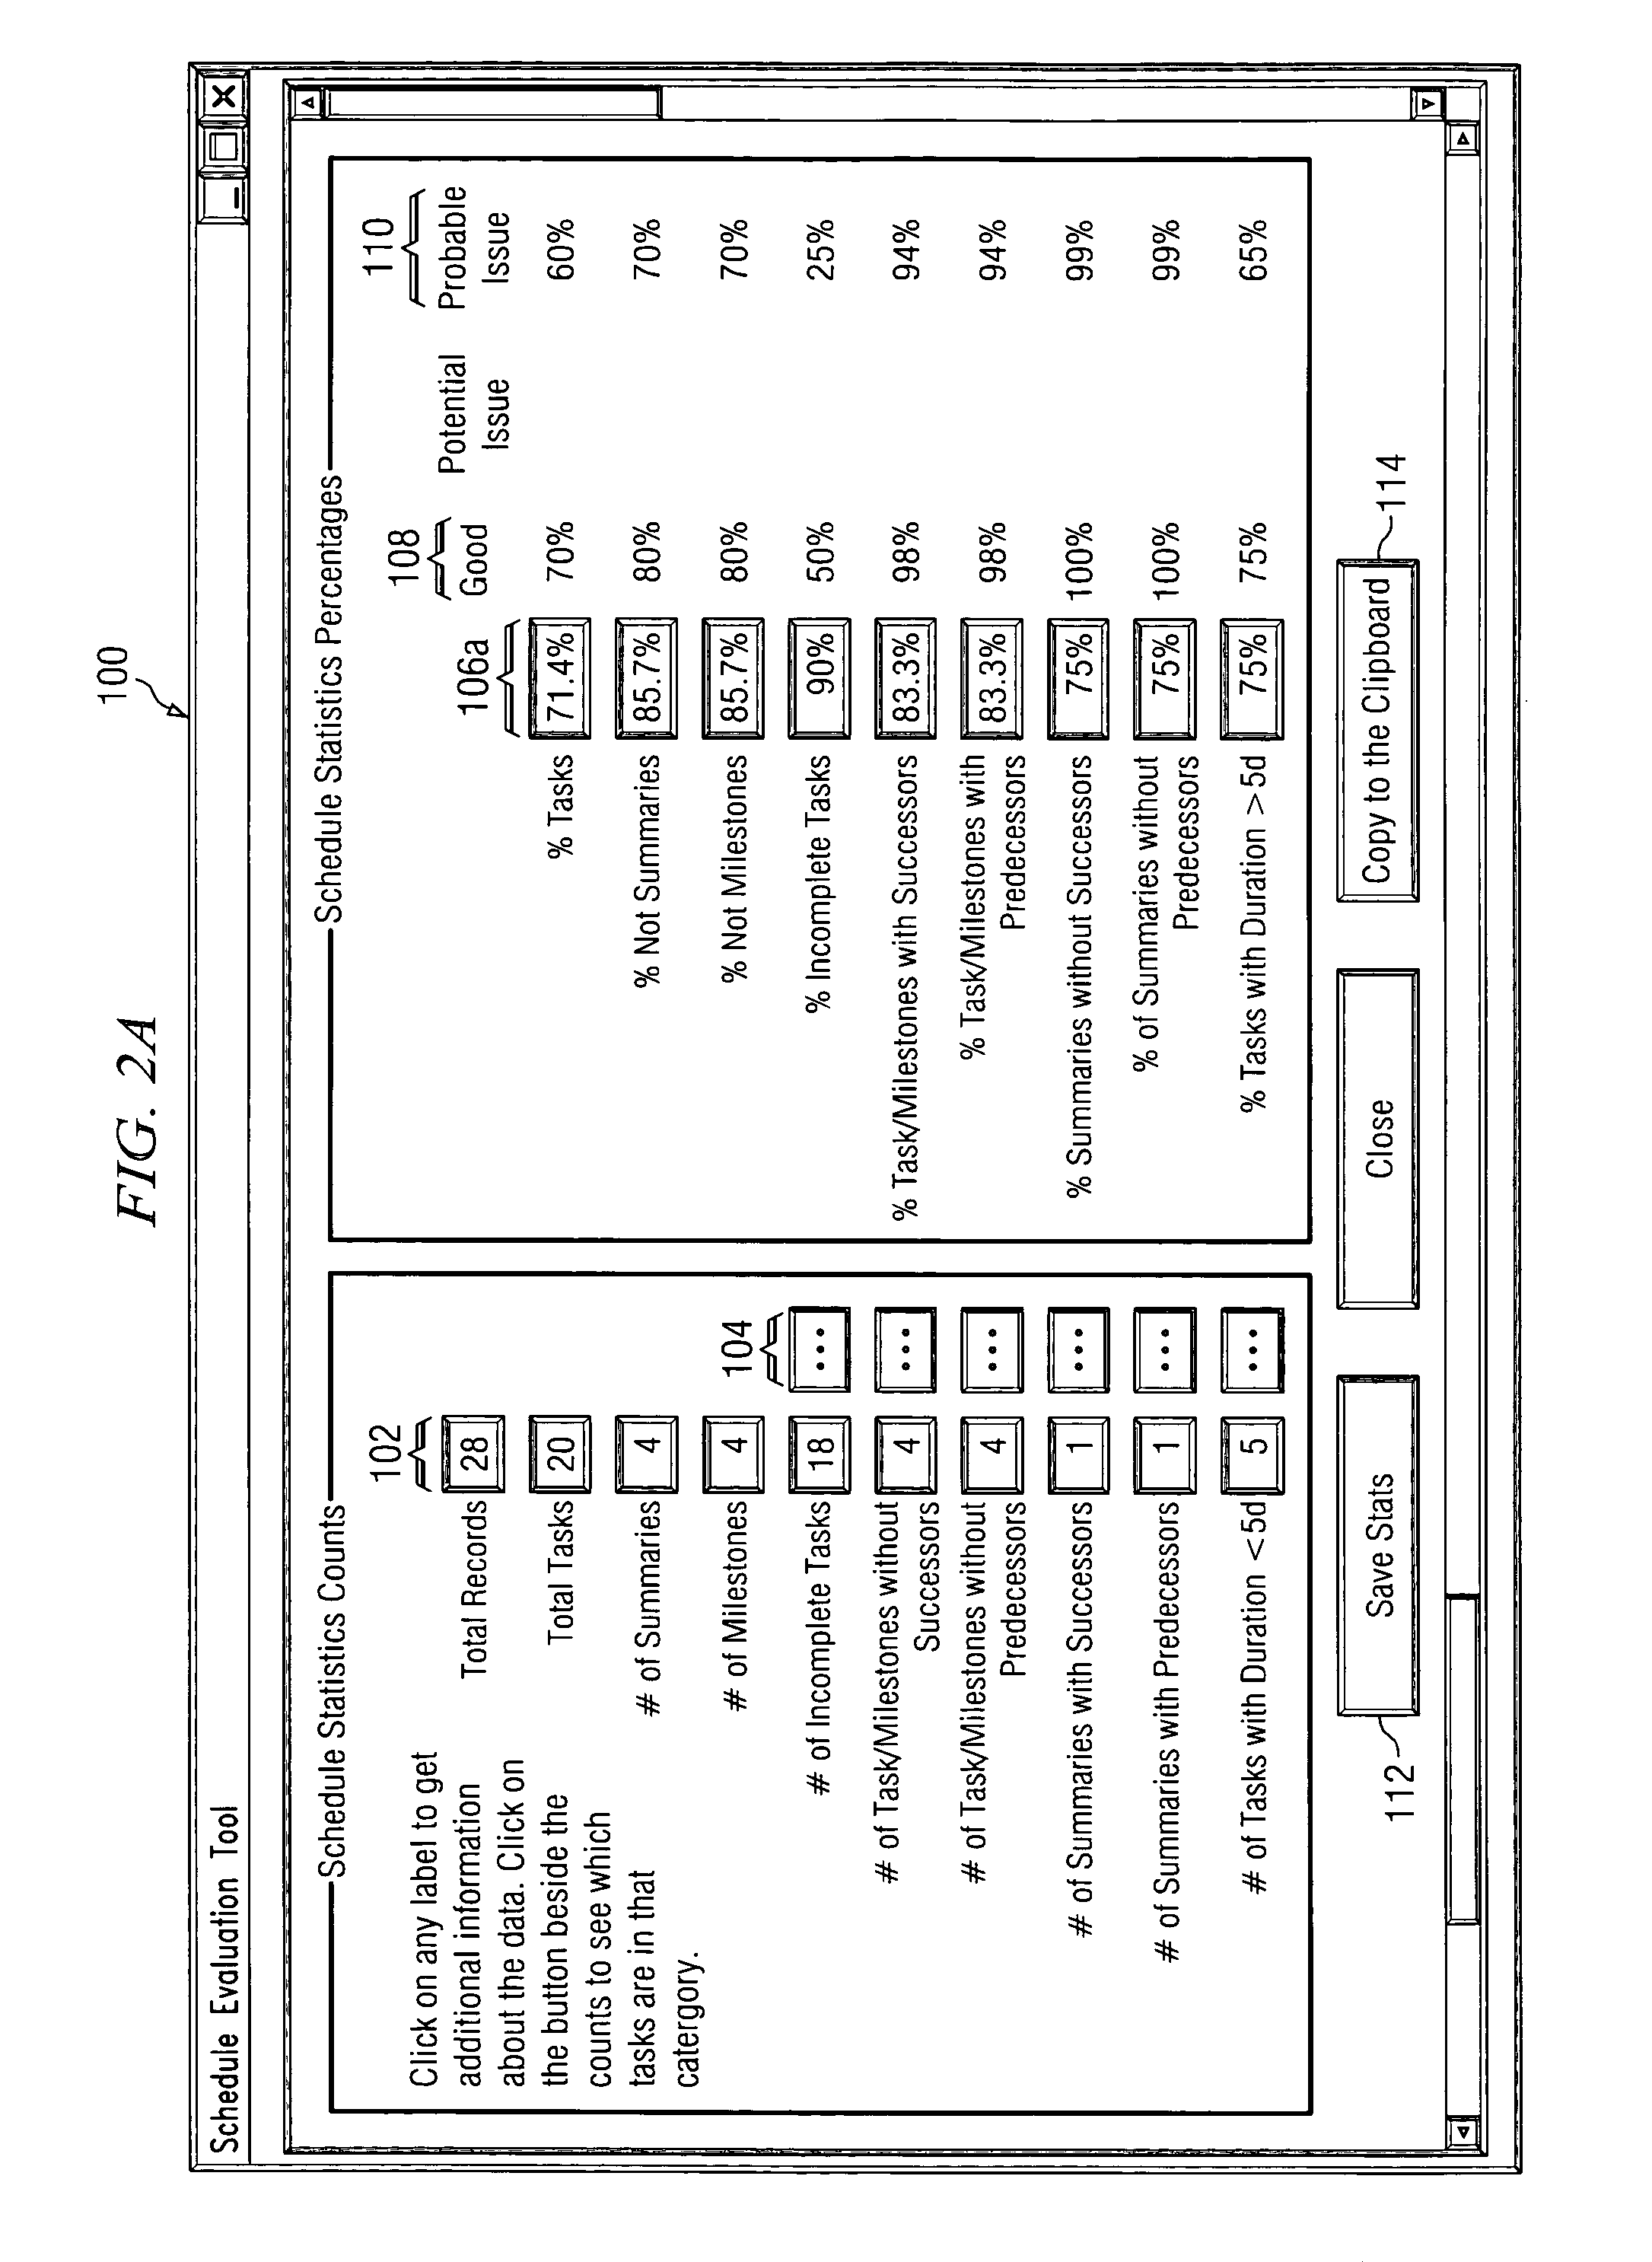 System and method for schedule quality assessment